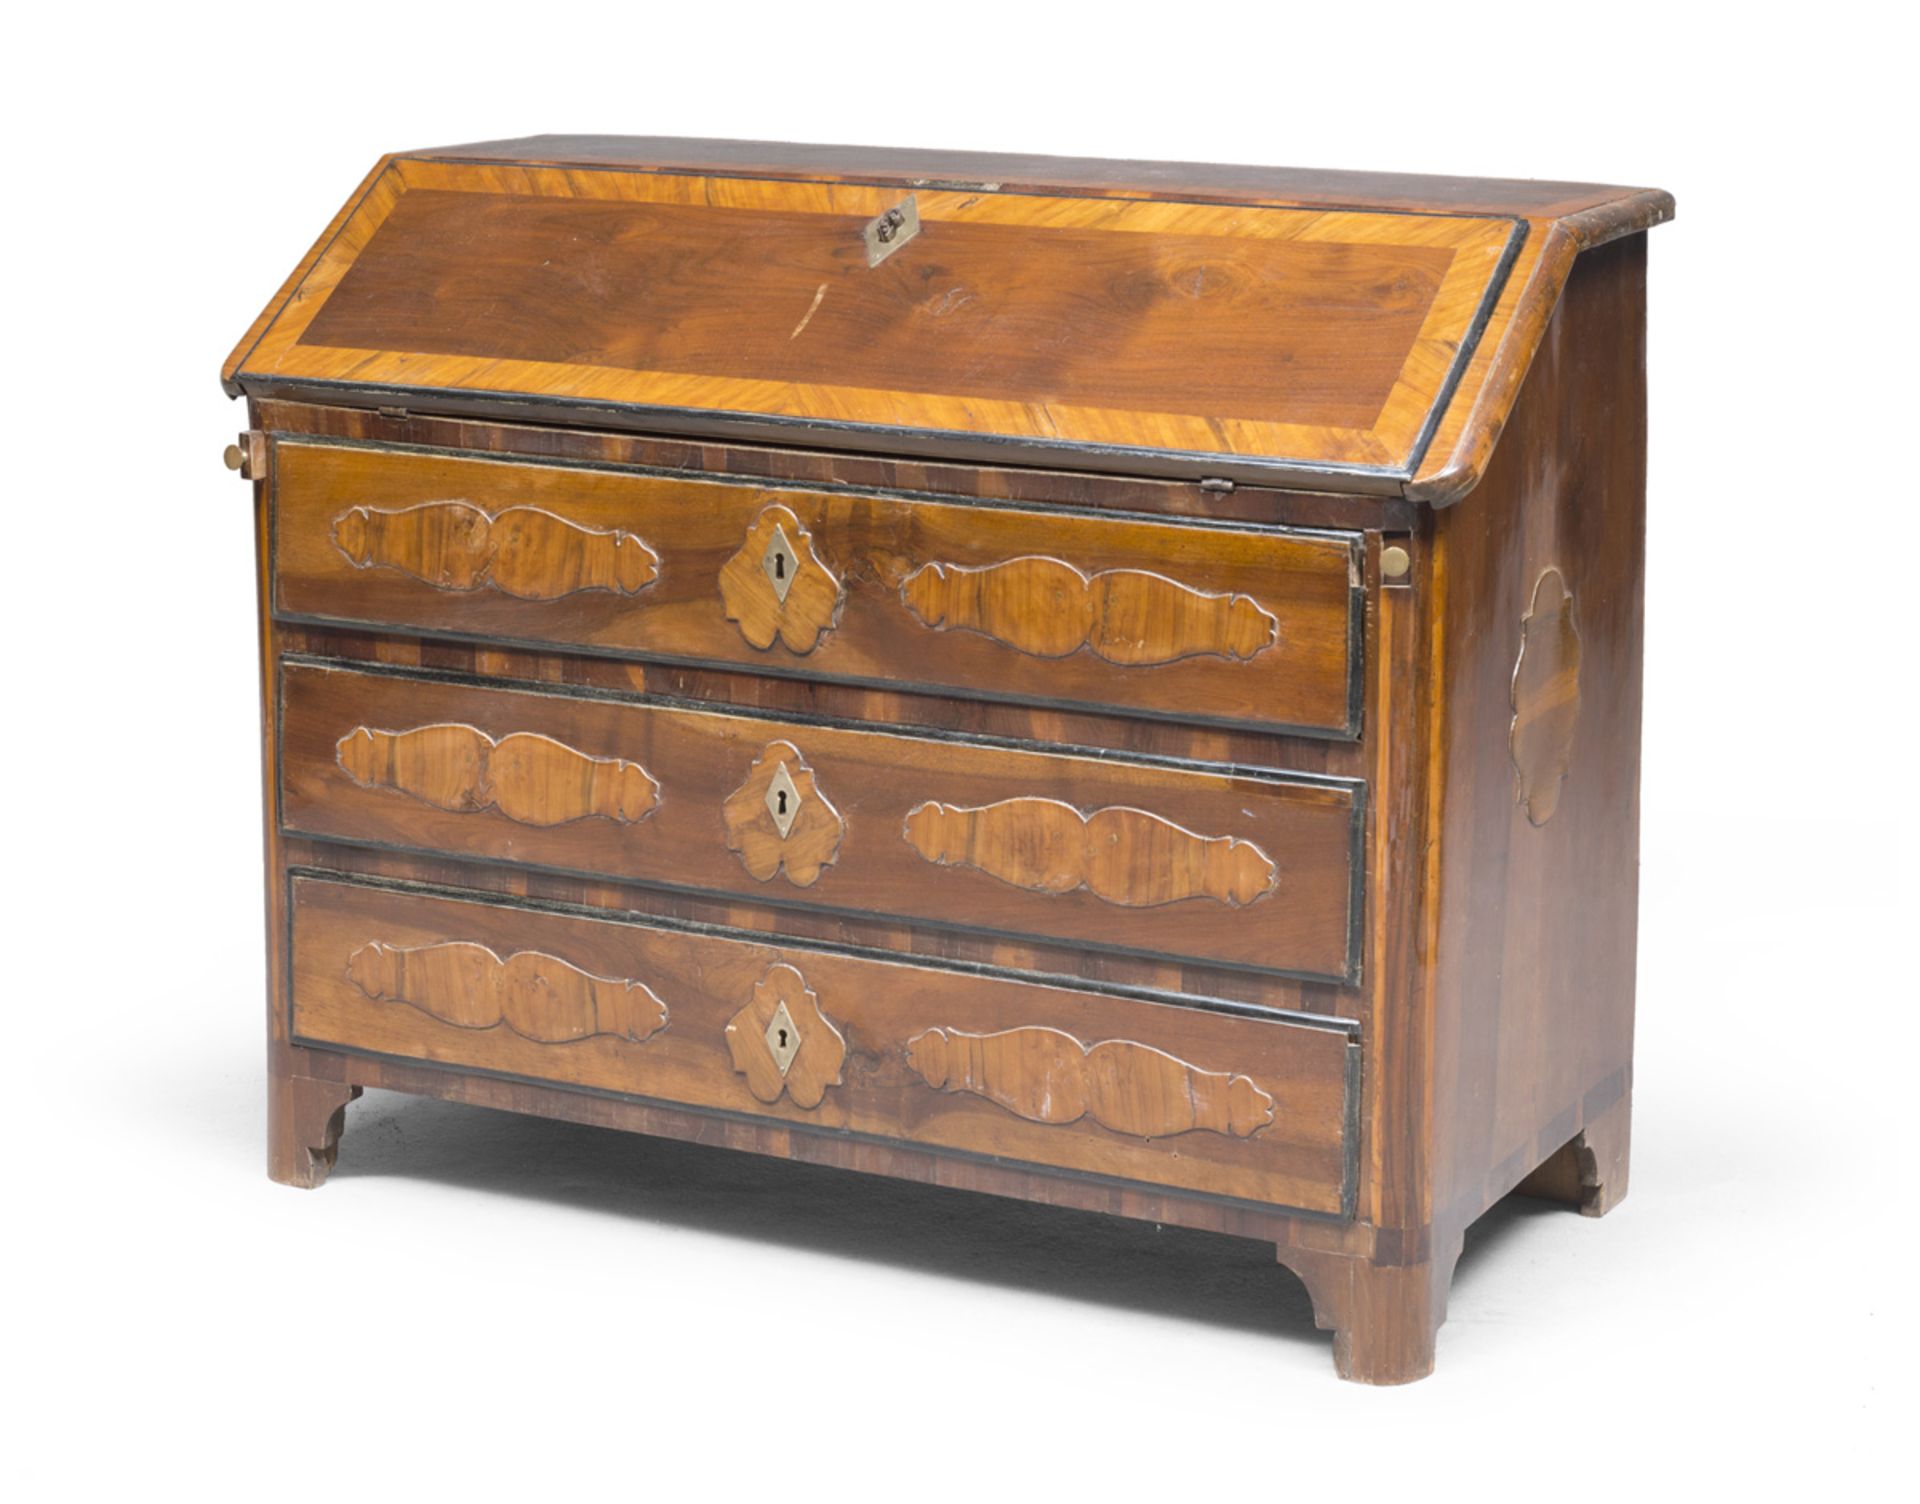 A BEAUTIFUL WALNUT SECRETAIRE, PIEDMONT 18TH CENTURY with reserves in rosewood. Inside with six